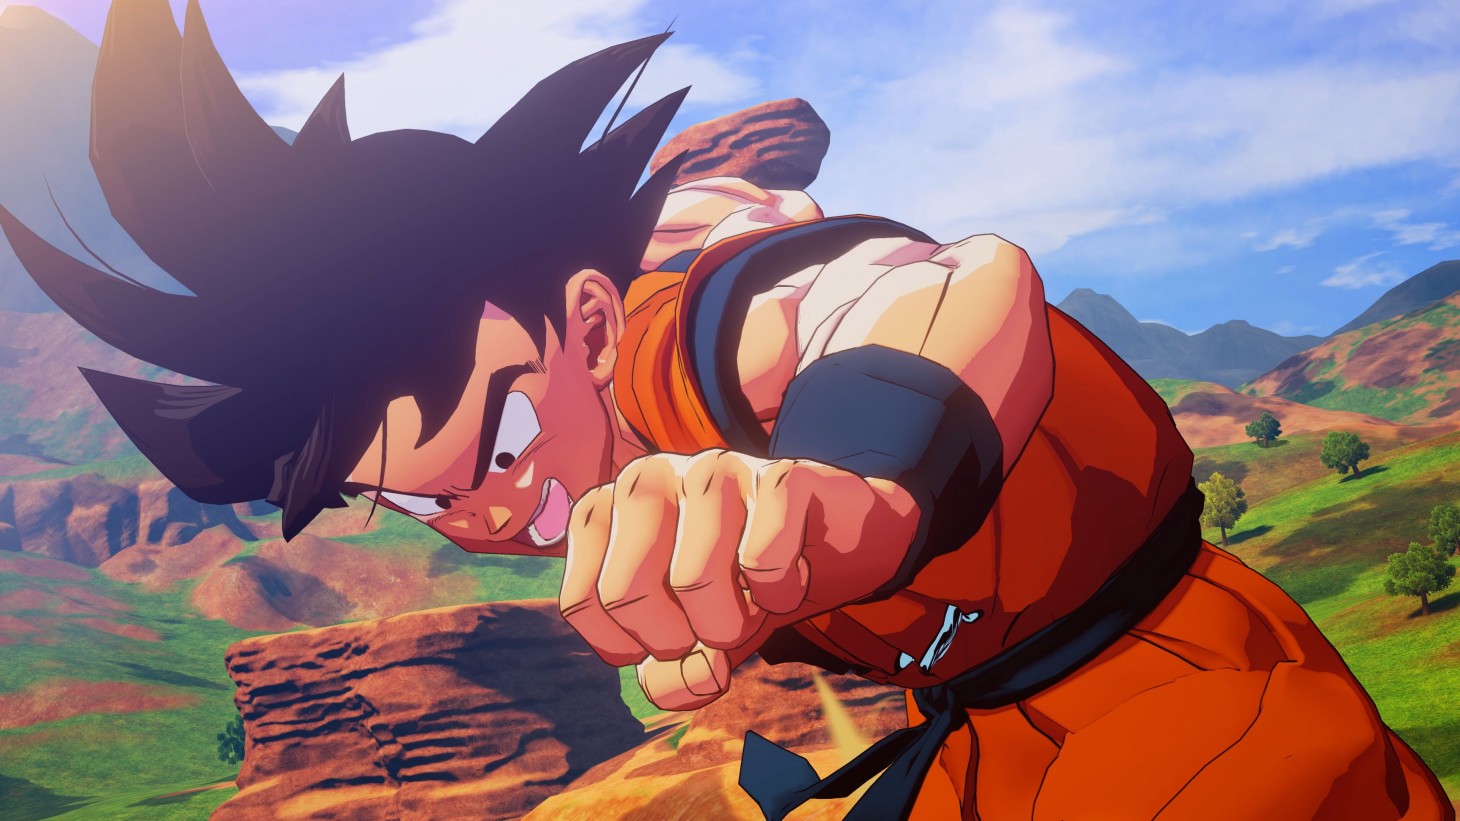 Learn about the new character Dragon Ball Z by playing it in your gaming pc.